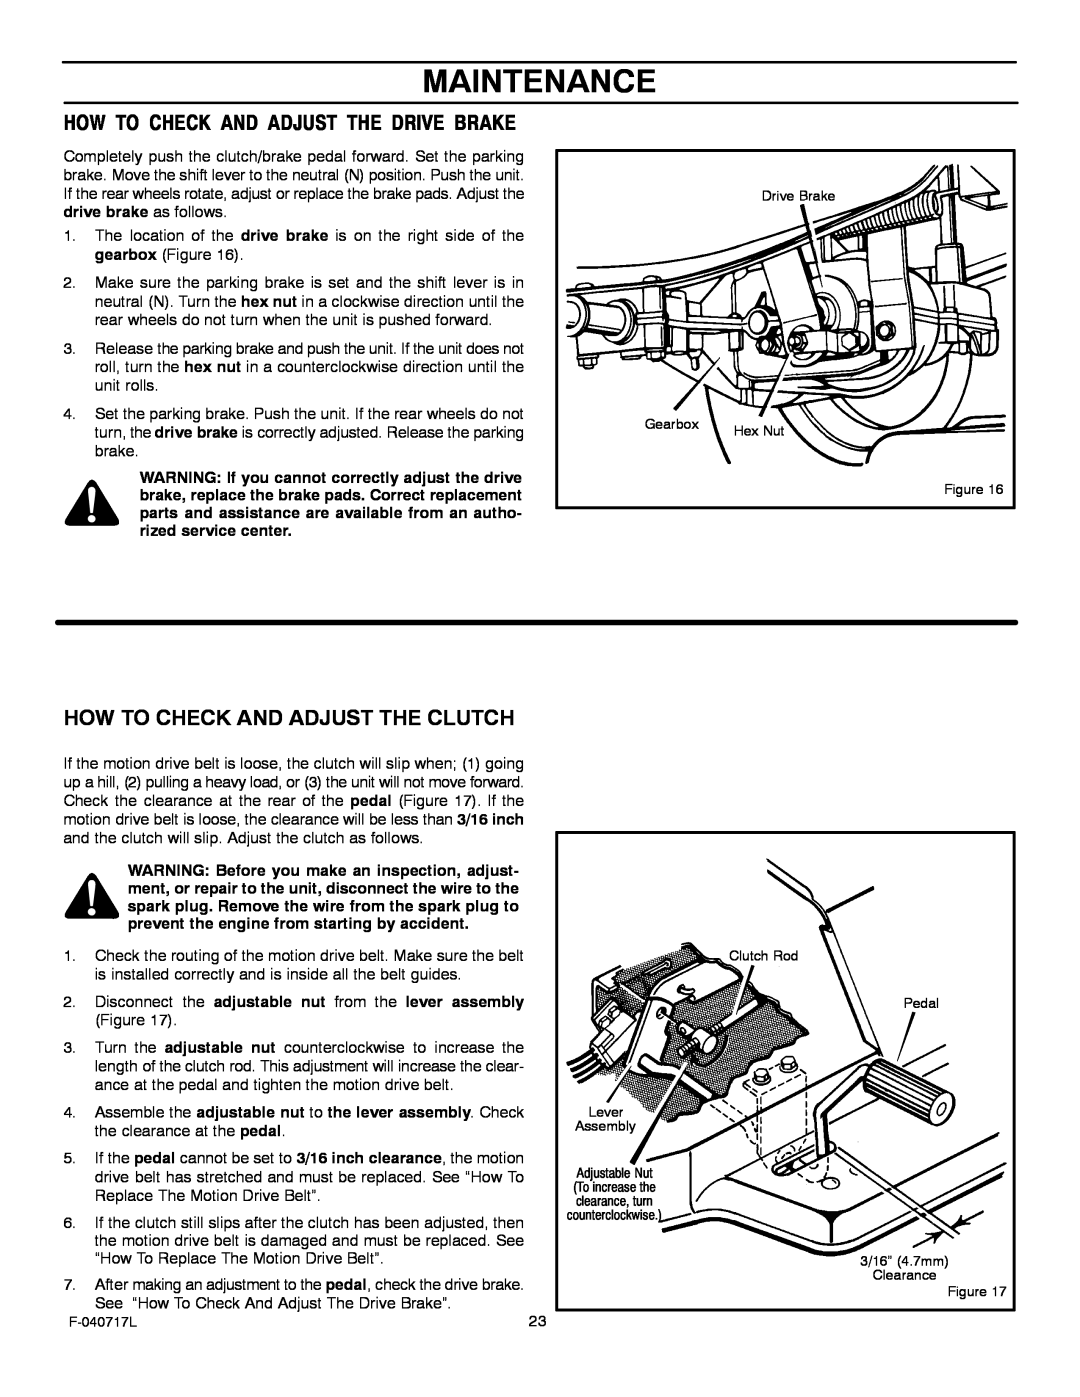 Murray 387002x92A manual Maintenance, How To Check And Adjust The Drive Brake, How To Check And Adjust The Clutch 